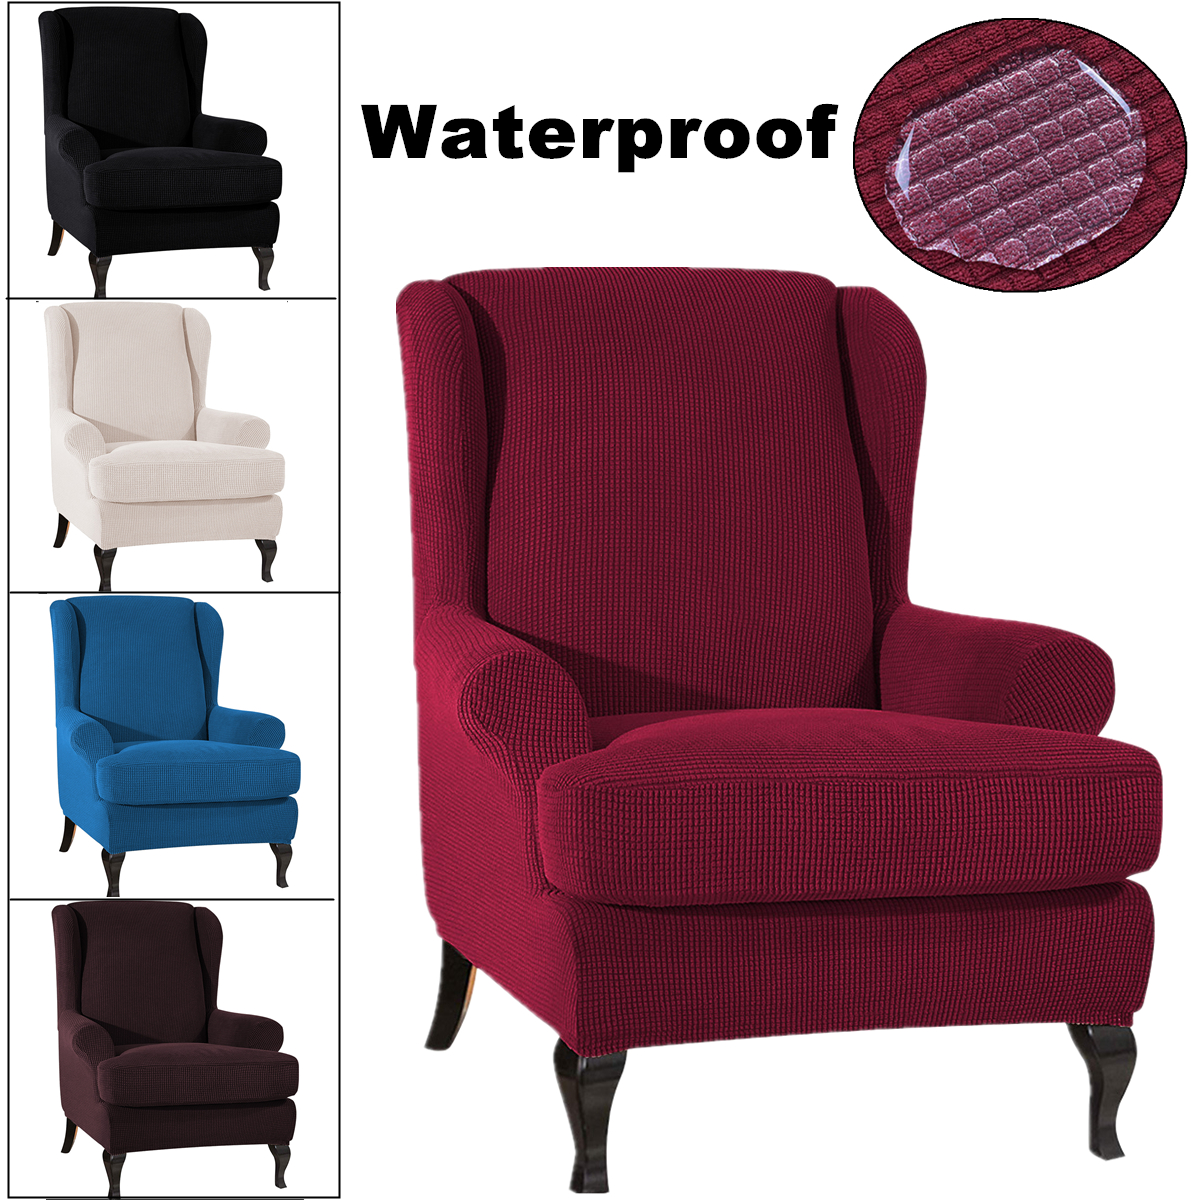 Waterproof-Elastic-Armchair-Wingback-Wing-Chair-Slipcover-Protector-Covers-1635286-1